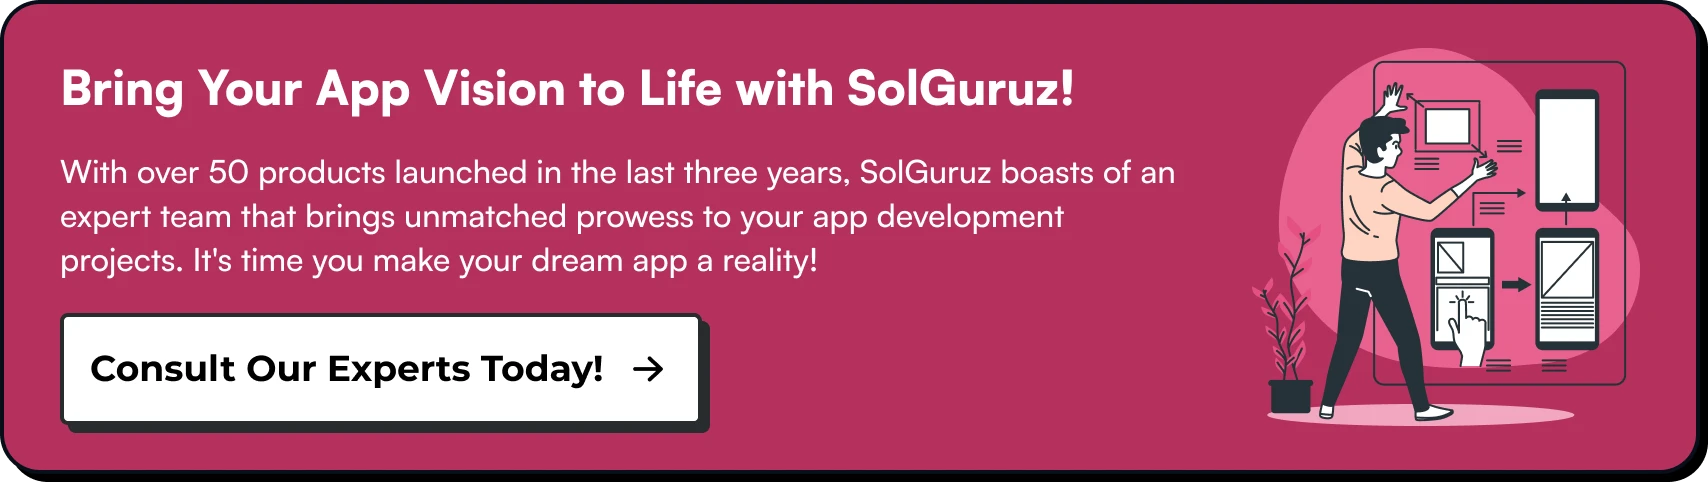 Bring Your App Vision to Life with SolGuruz!